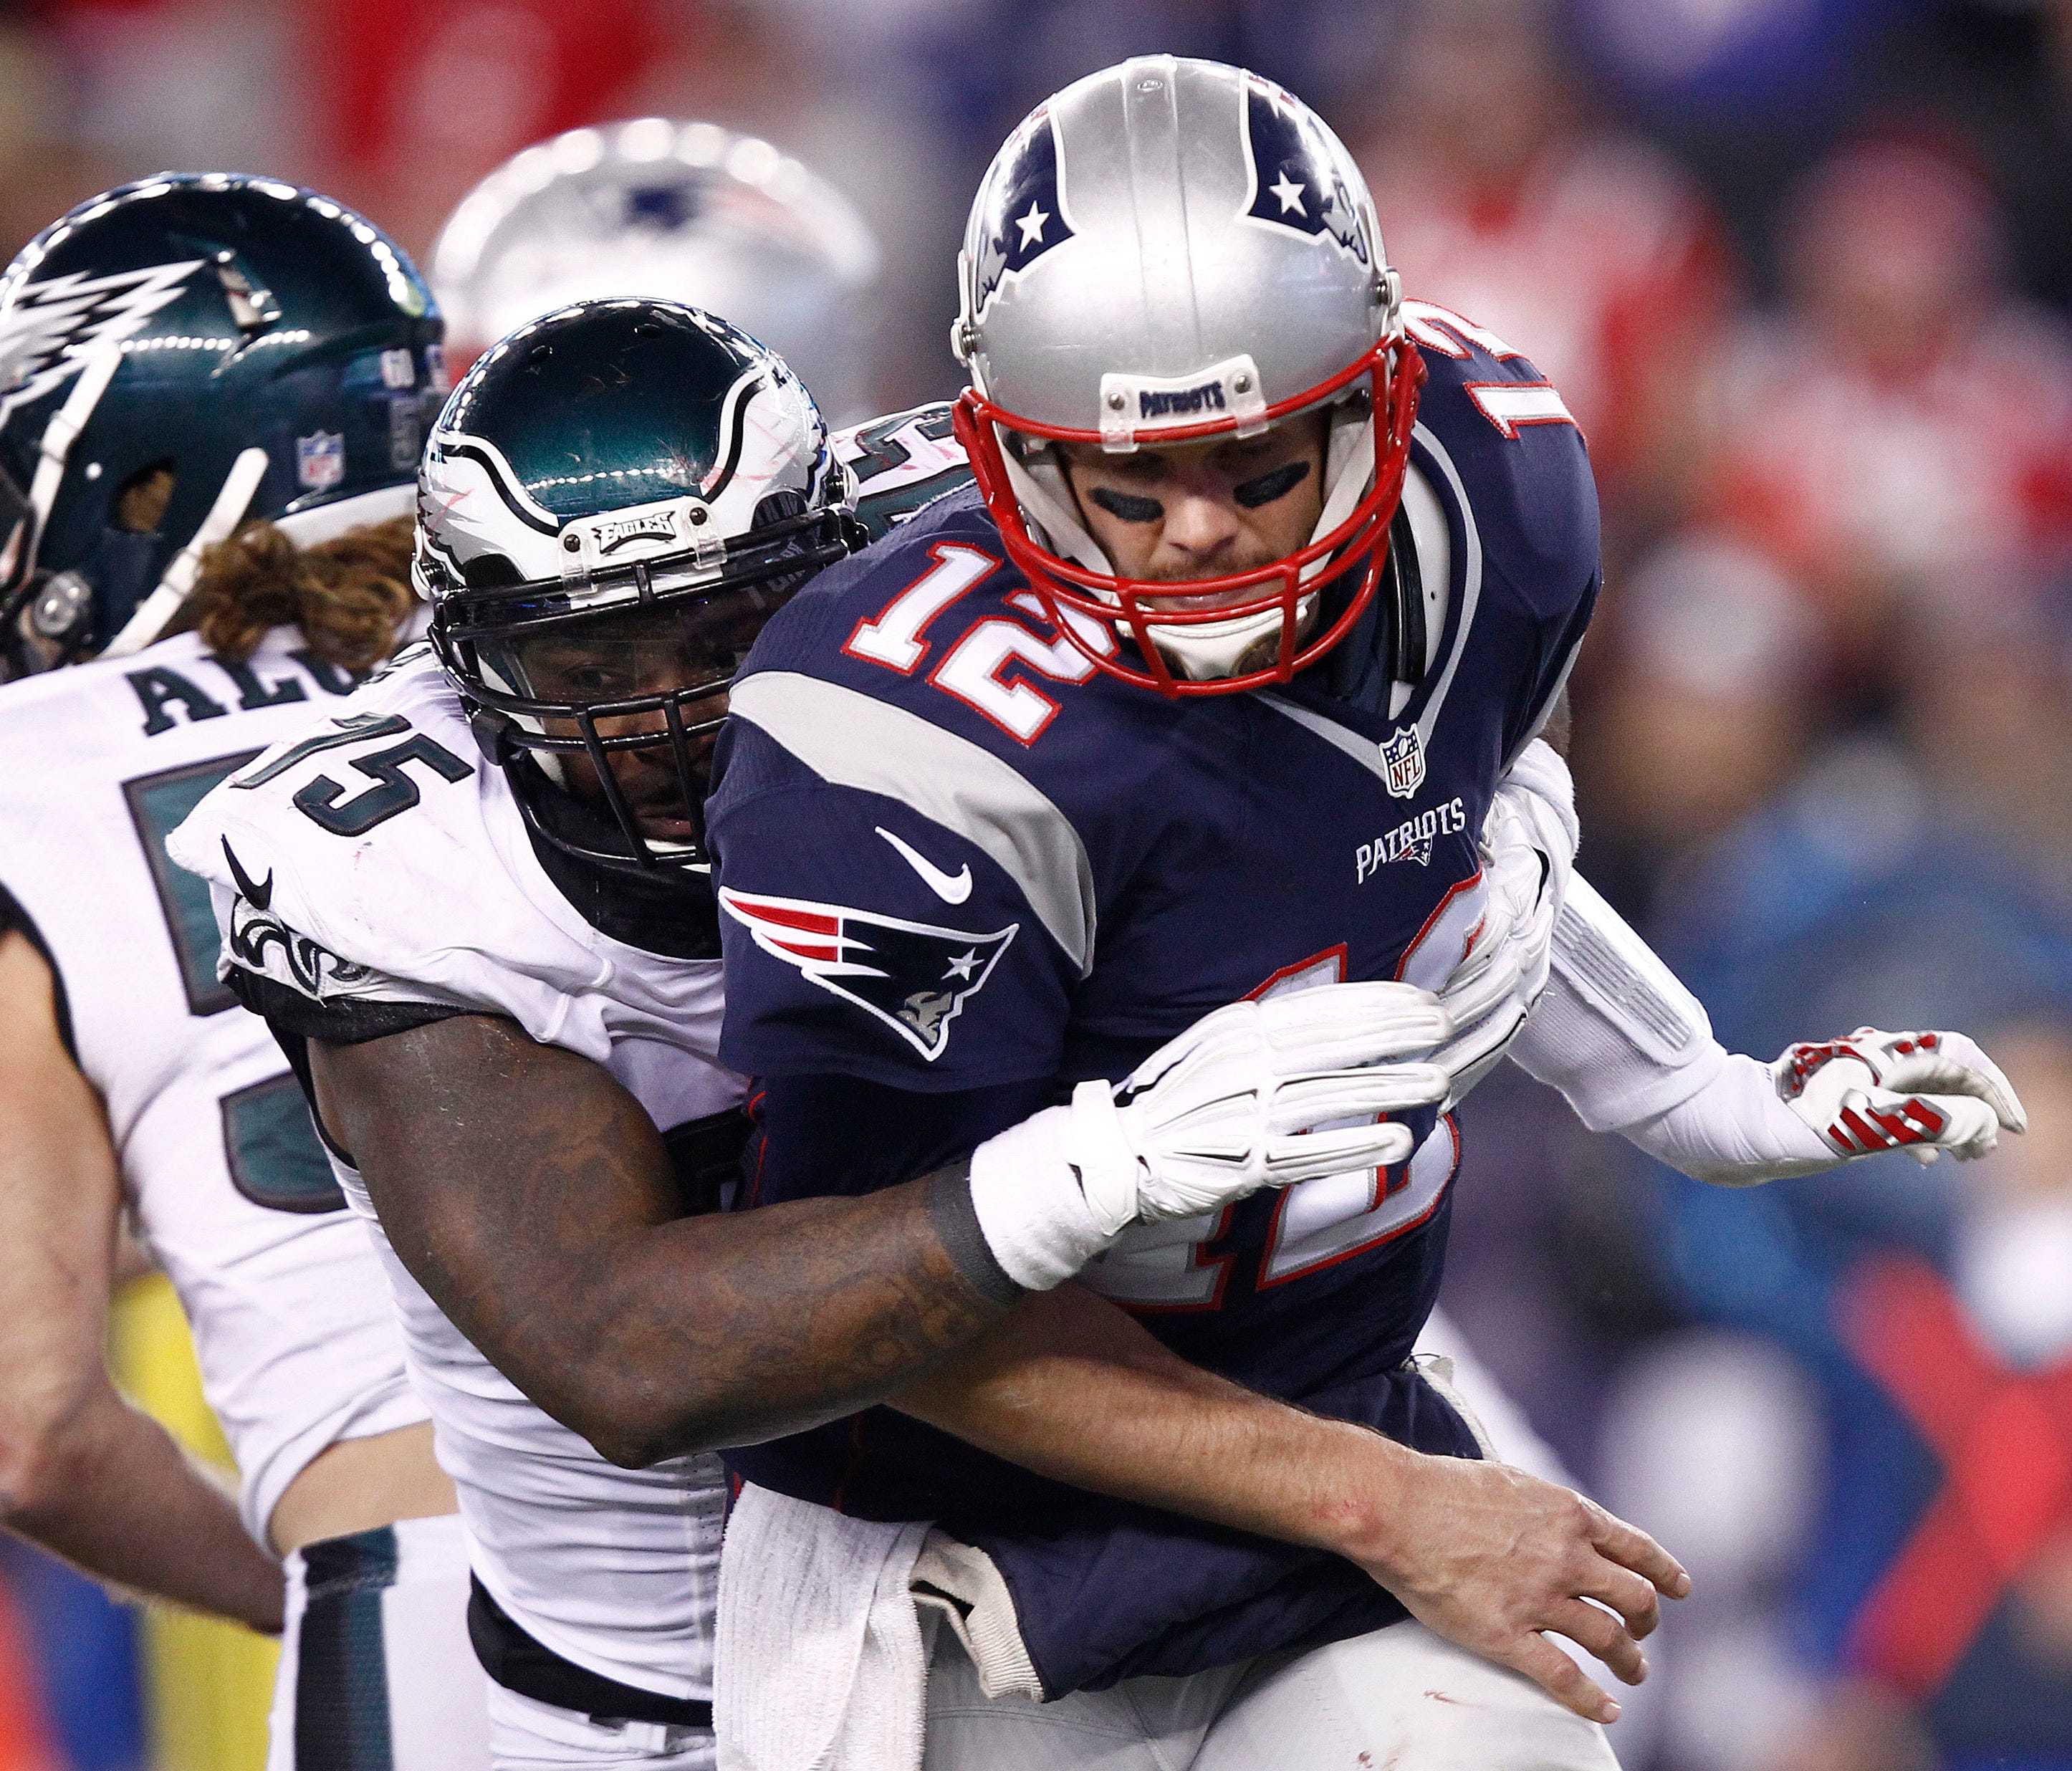 New England Patriots quarterback Tom Brady (12) is tackled by Philadelphia Eagles defensive end Vinny Curry (back) during the second half at Gillette Stadium.